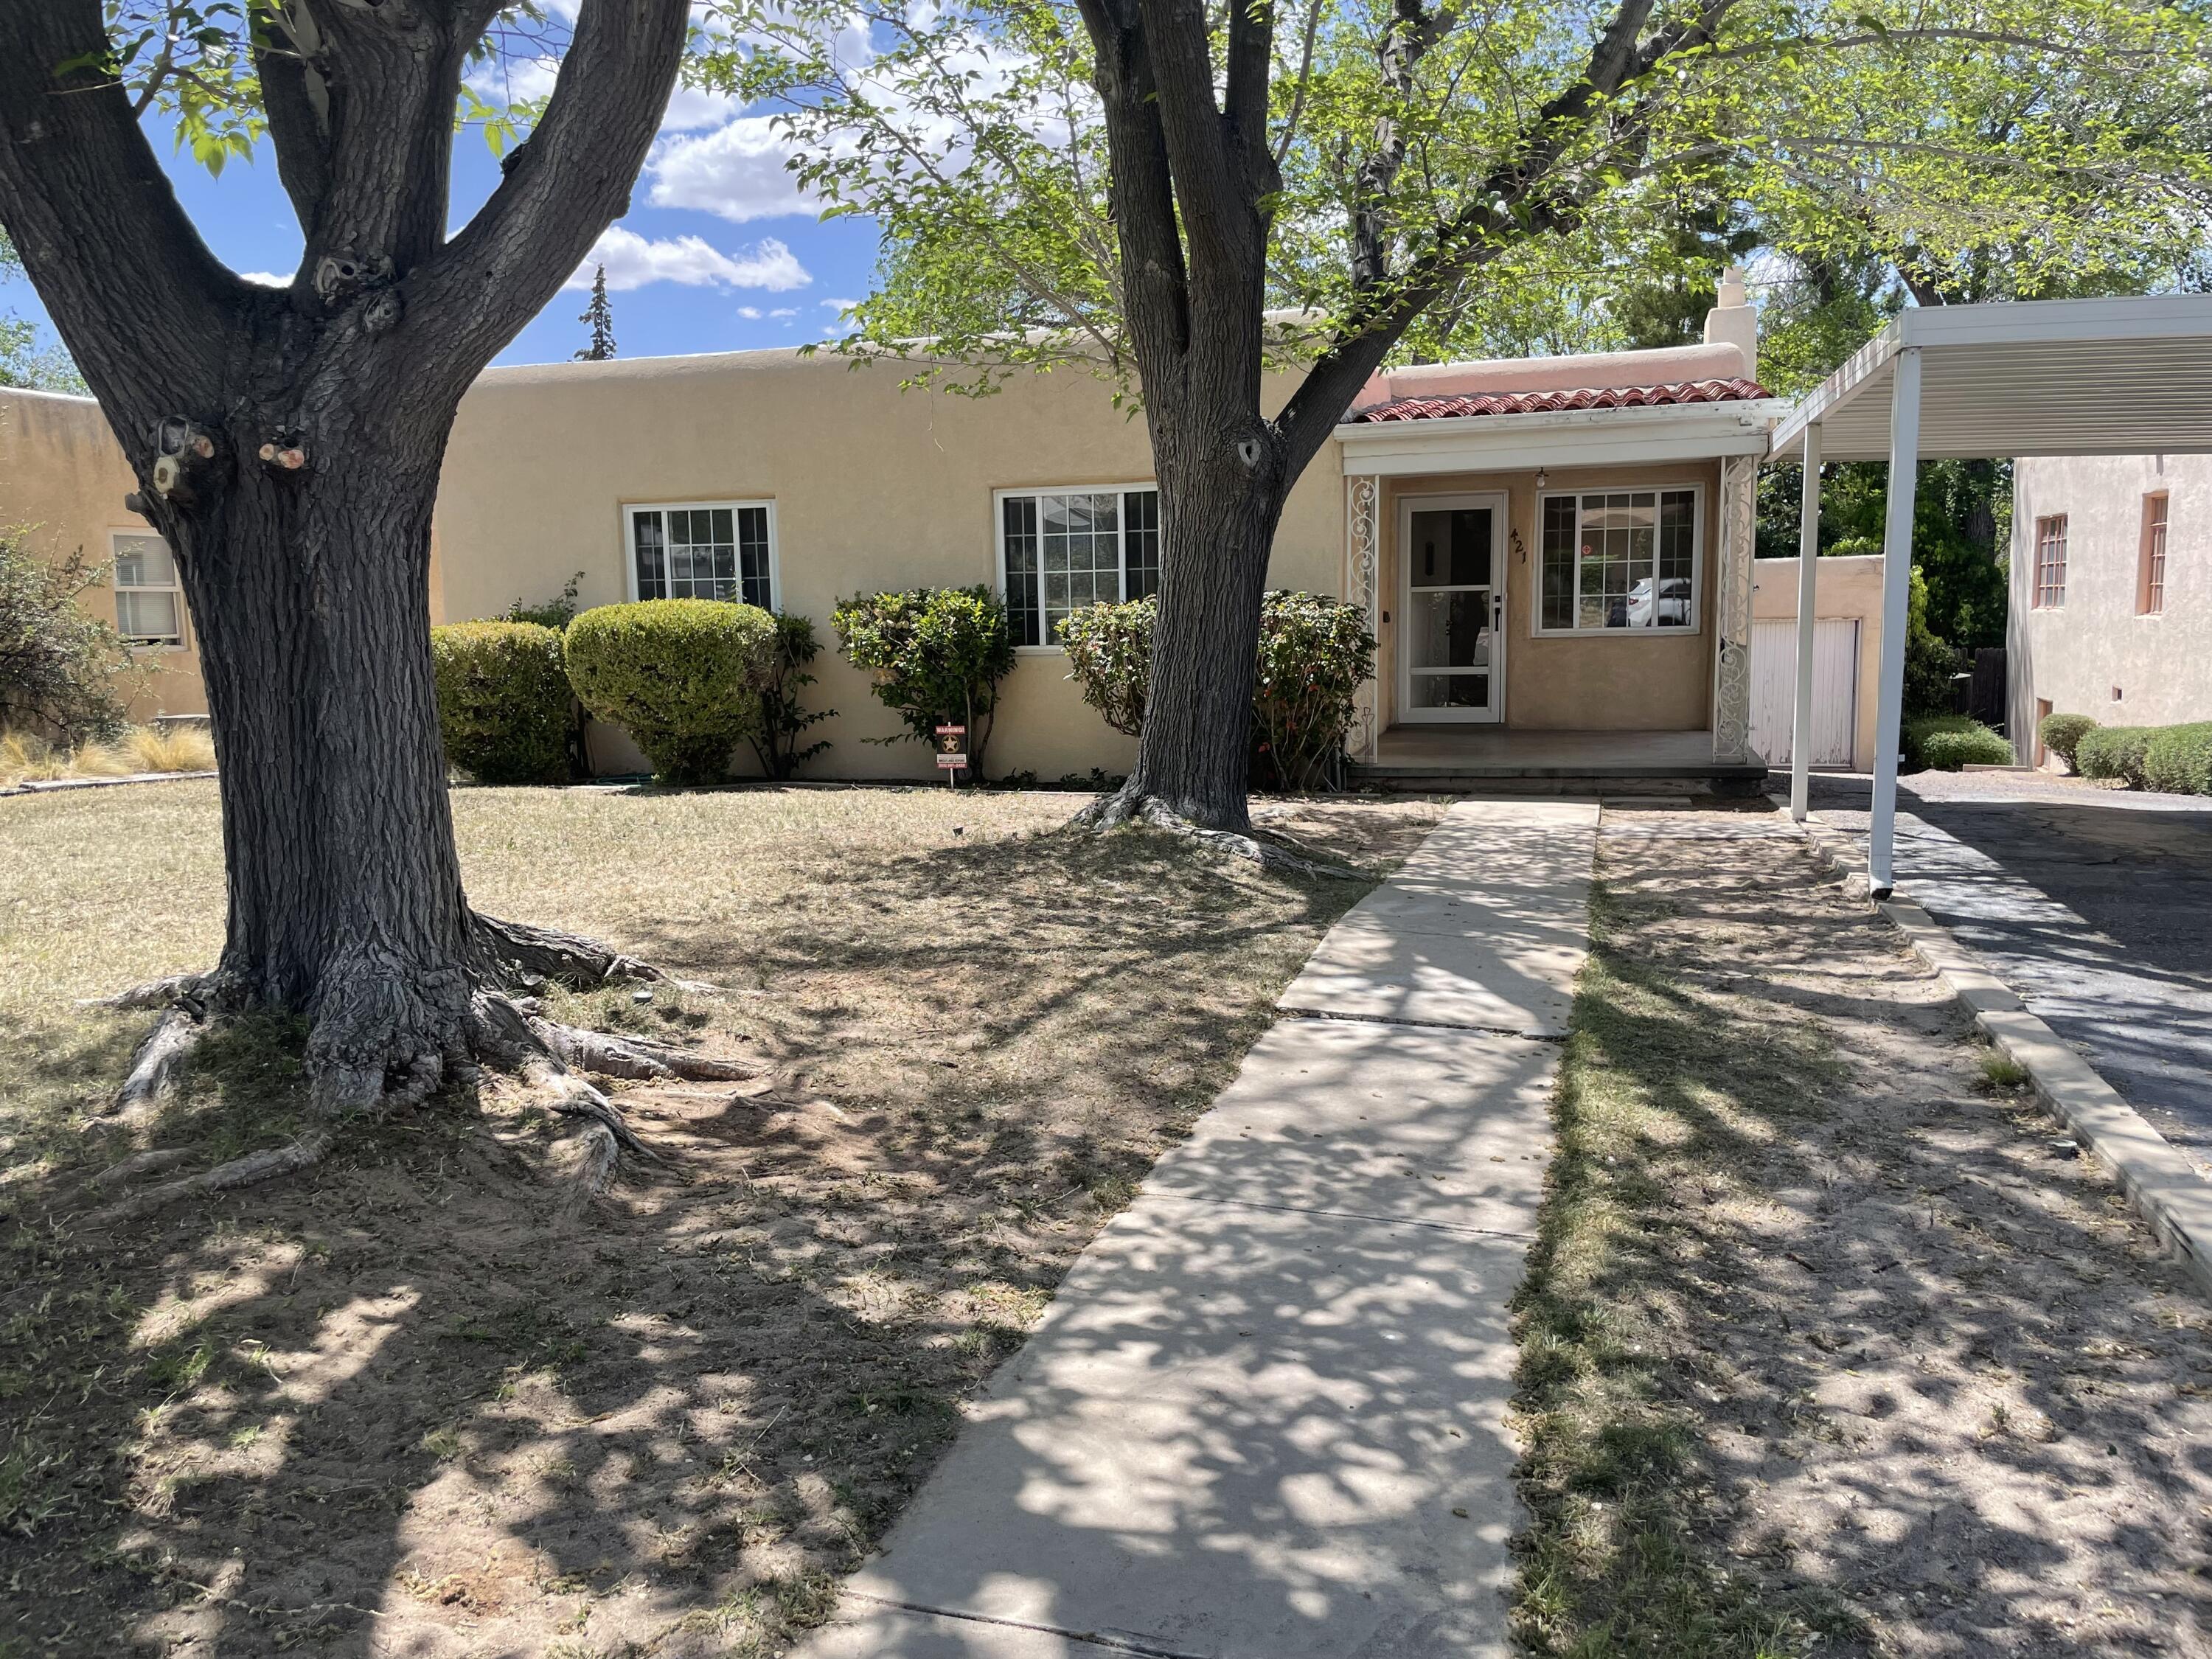 Great location near UNM, Airport and Hyder Park. Nice 2 bedroom home with 2 living areas, and an extra bedroom/office downstairs. Roof and master cool are newer, windows are newer vinyl double pane. There's a large backyard with lots of shade!